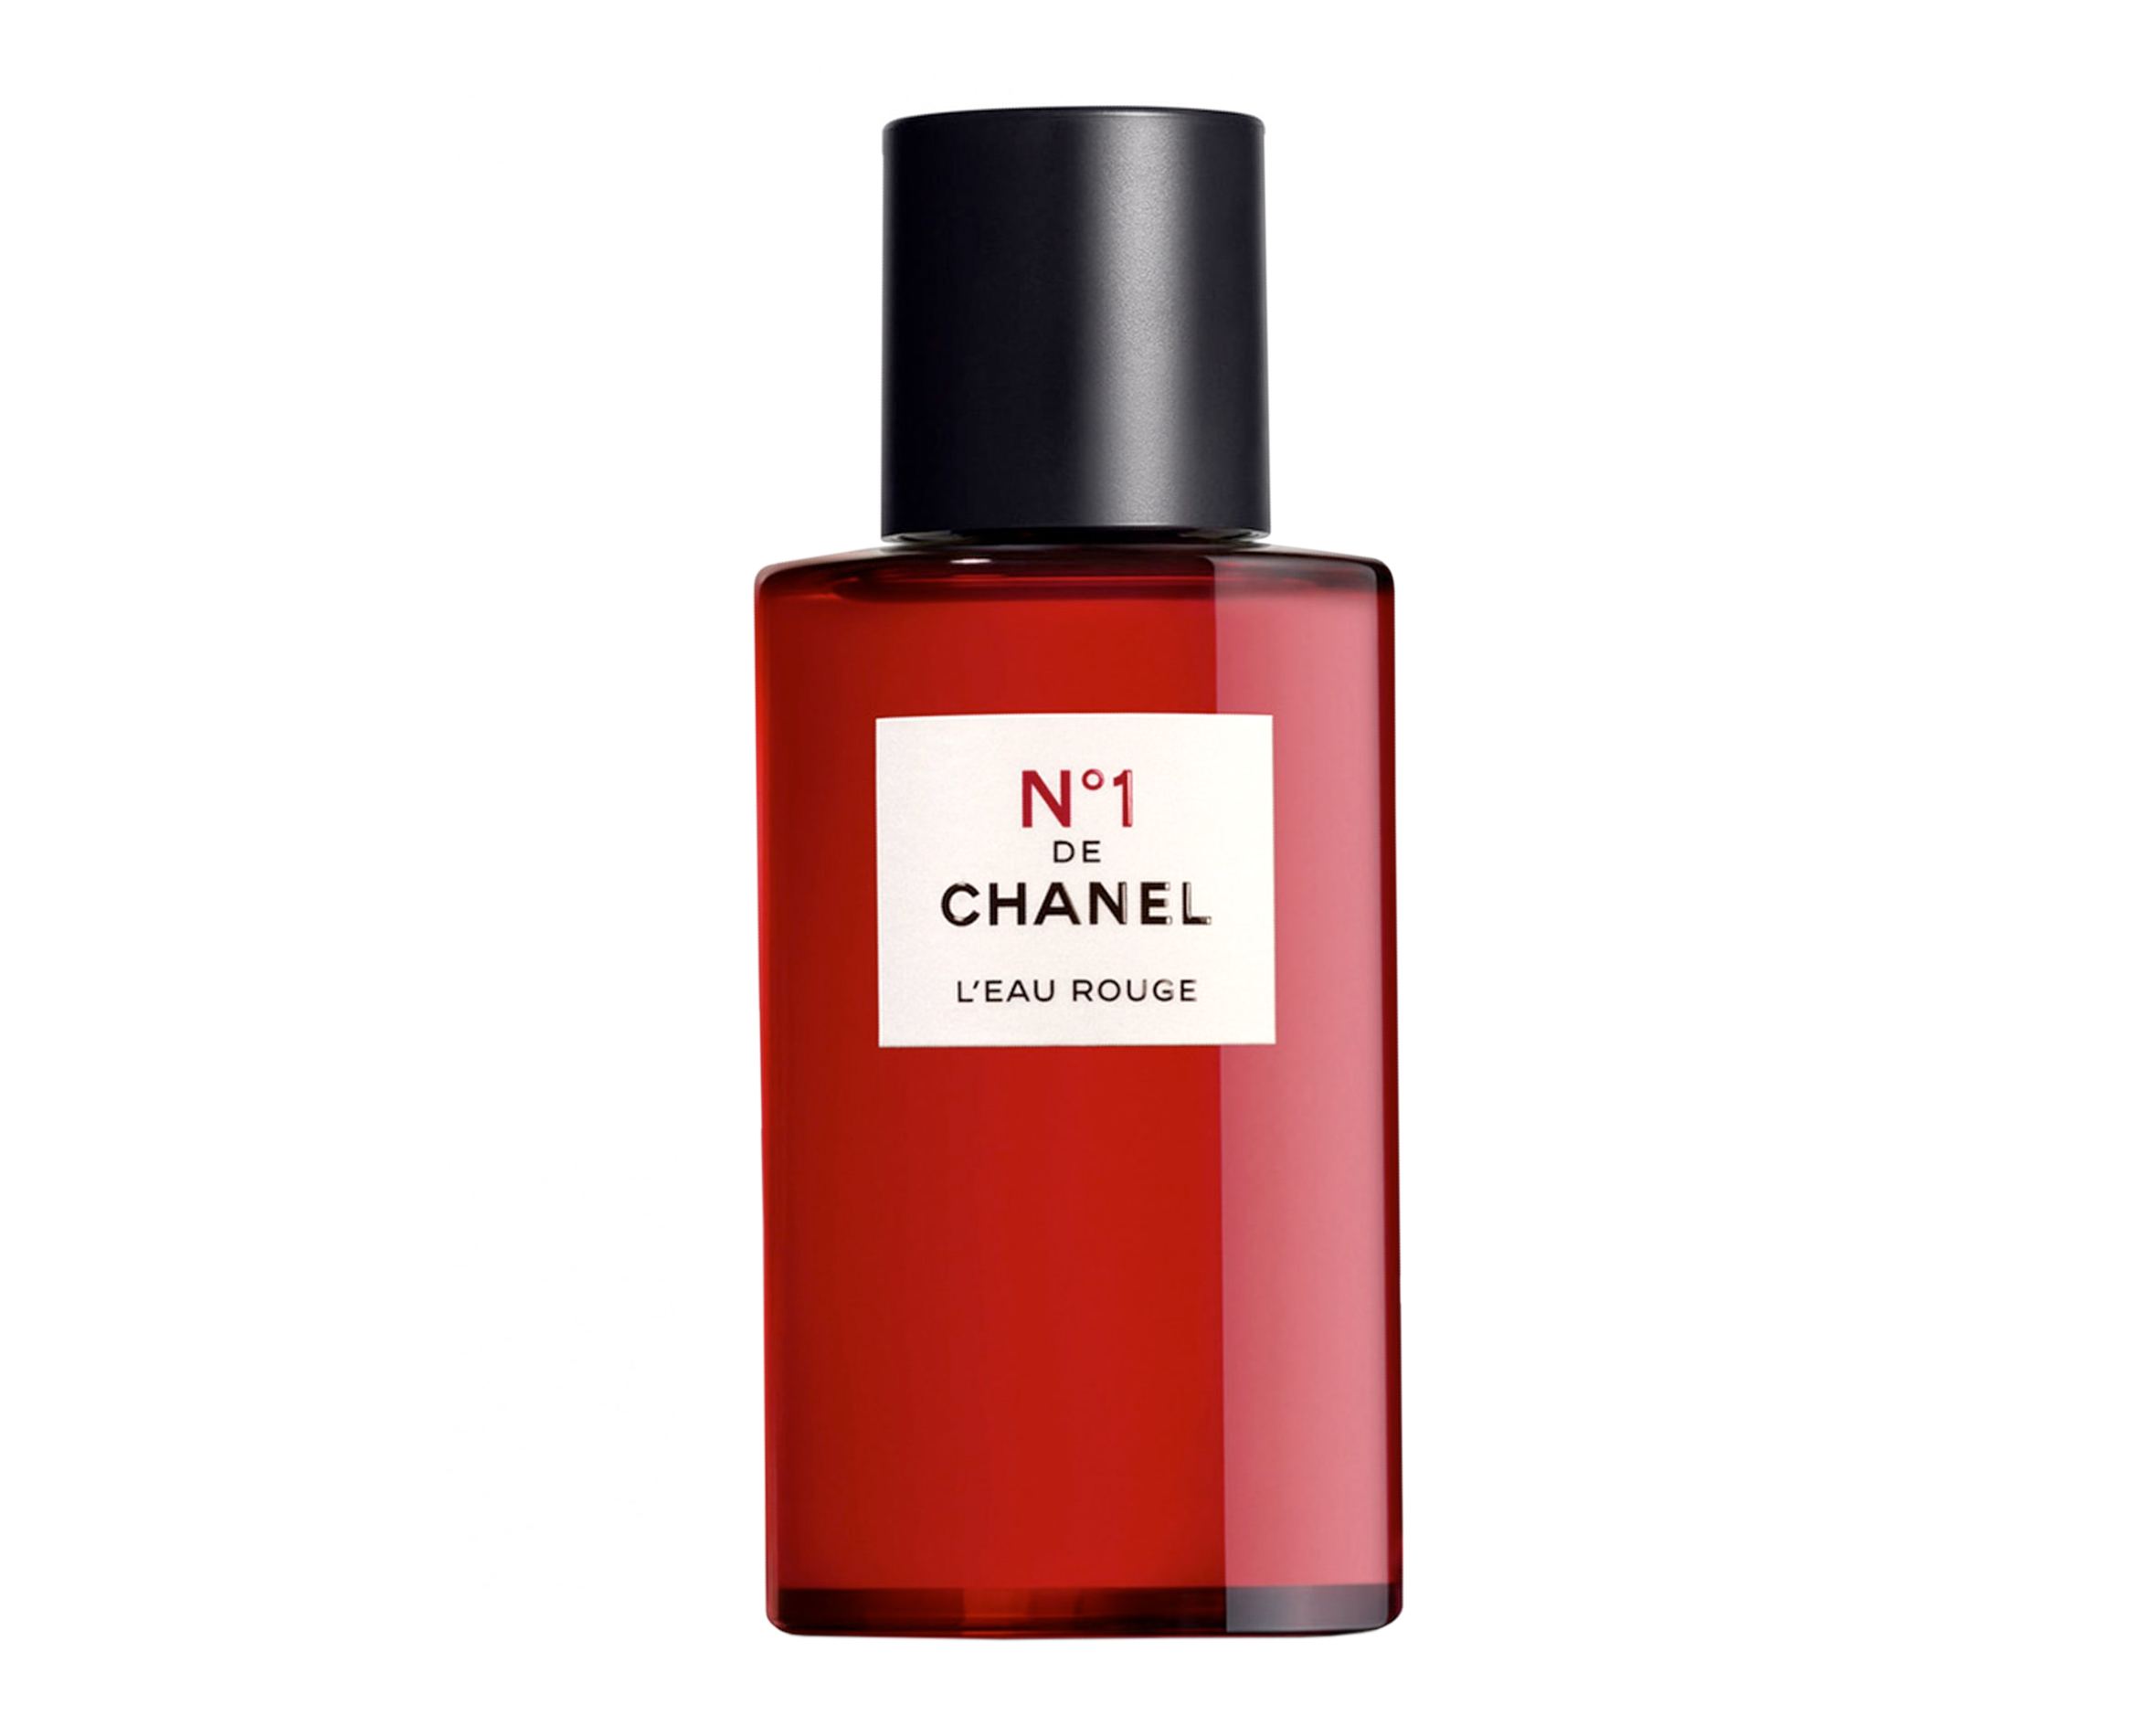 Beauty Review: The N°1 De Chanel Beauty Products You Should Buy